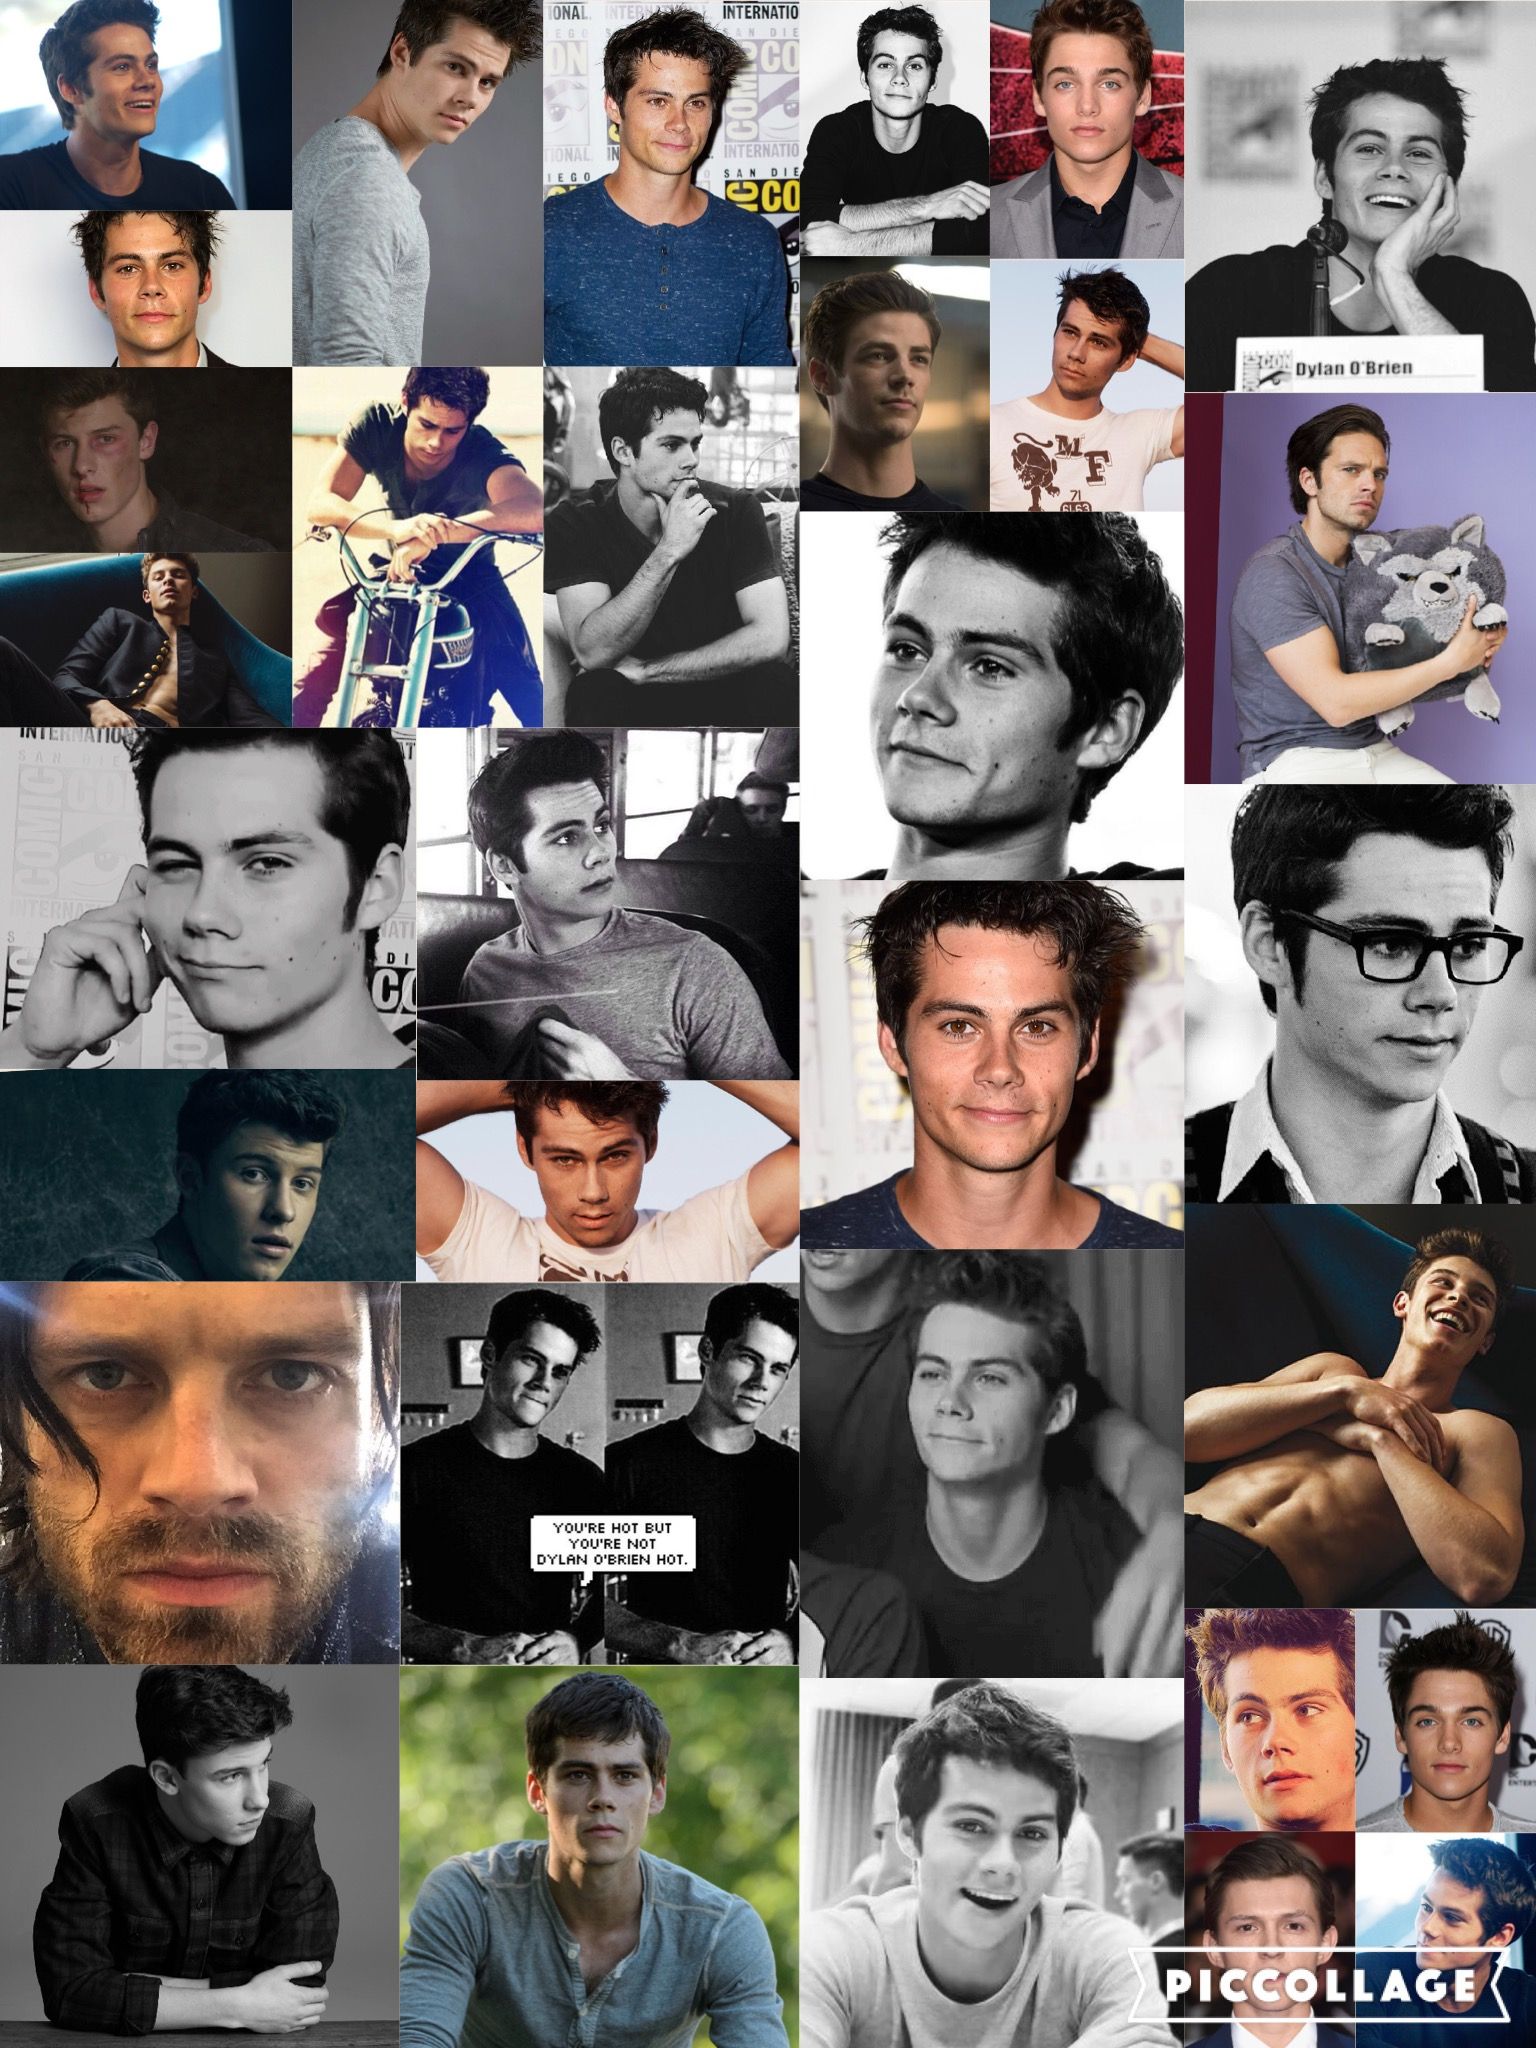 Bae Wallpaper. Dylan O'Brien, Shawn Mendes, Sebastian Stan, Dylan Sprayberry, Tom Holland and Grant Gustin. Sebastian stan, Dylan o'brien, Shawn mendes